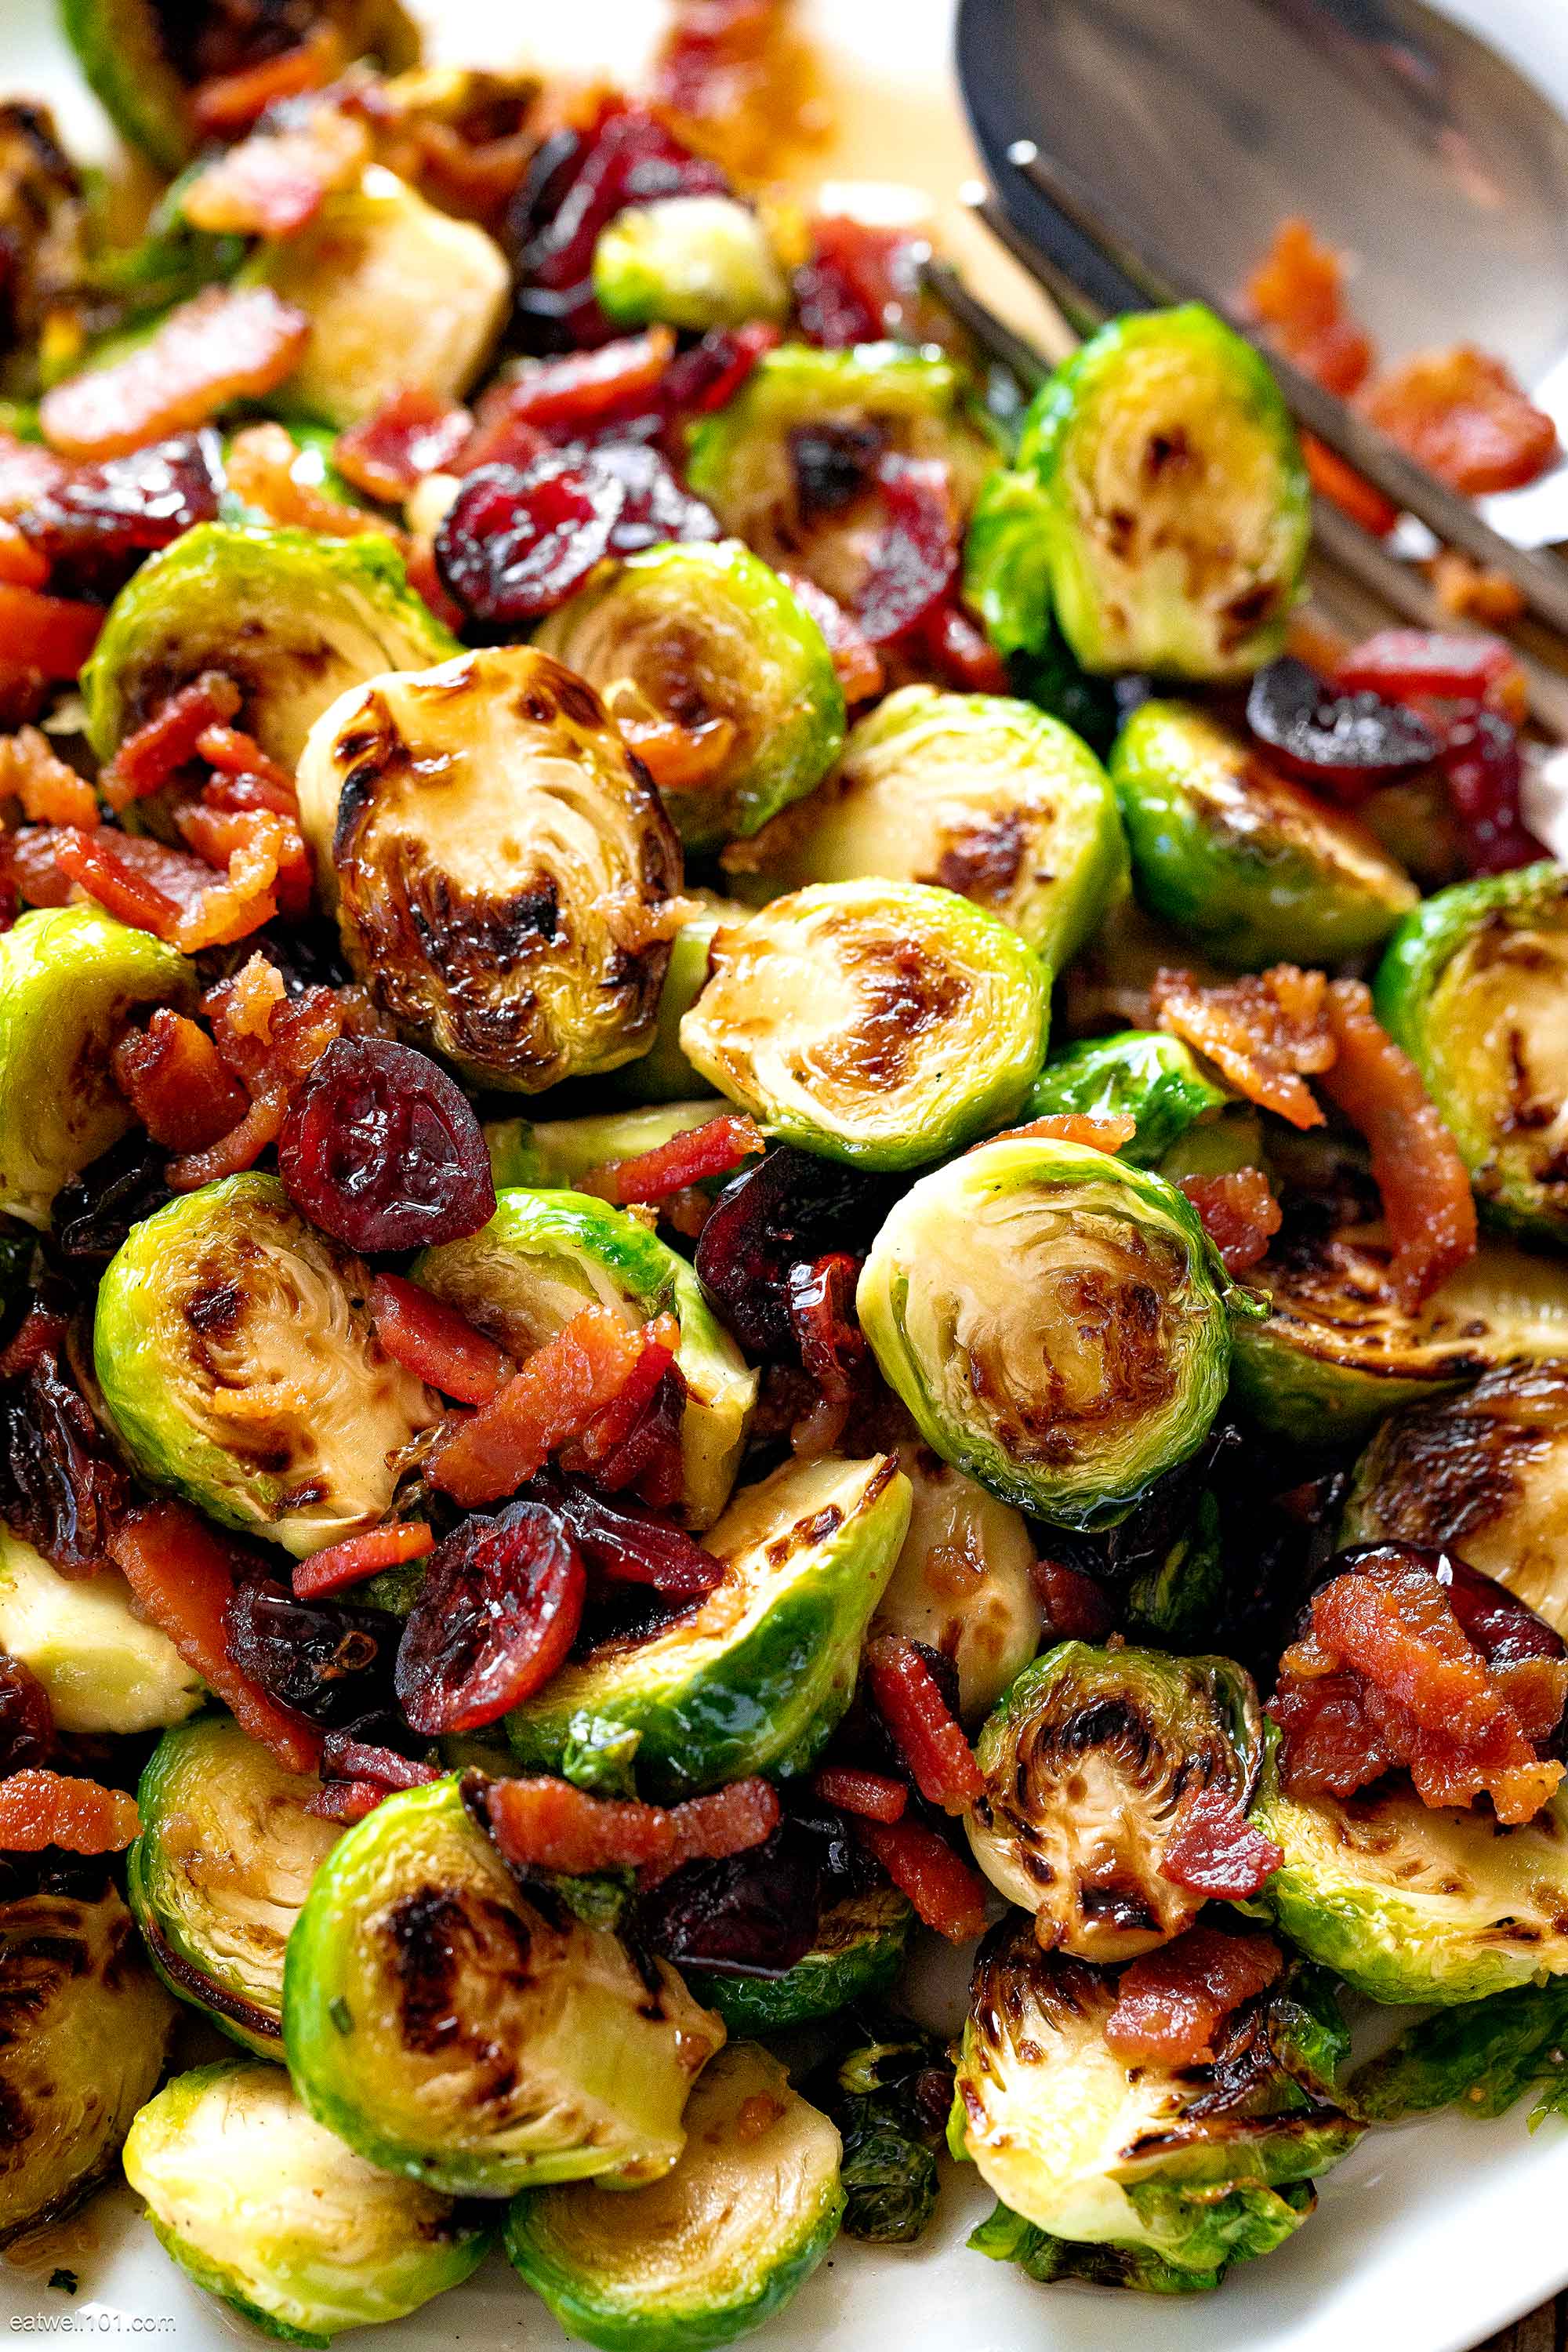 Outback Brussel Sprouts Recipe - Find Vegetarian Recipes